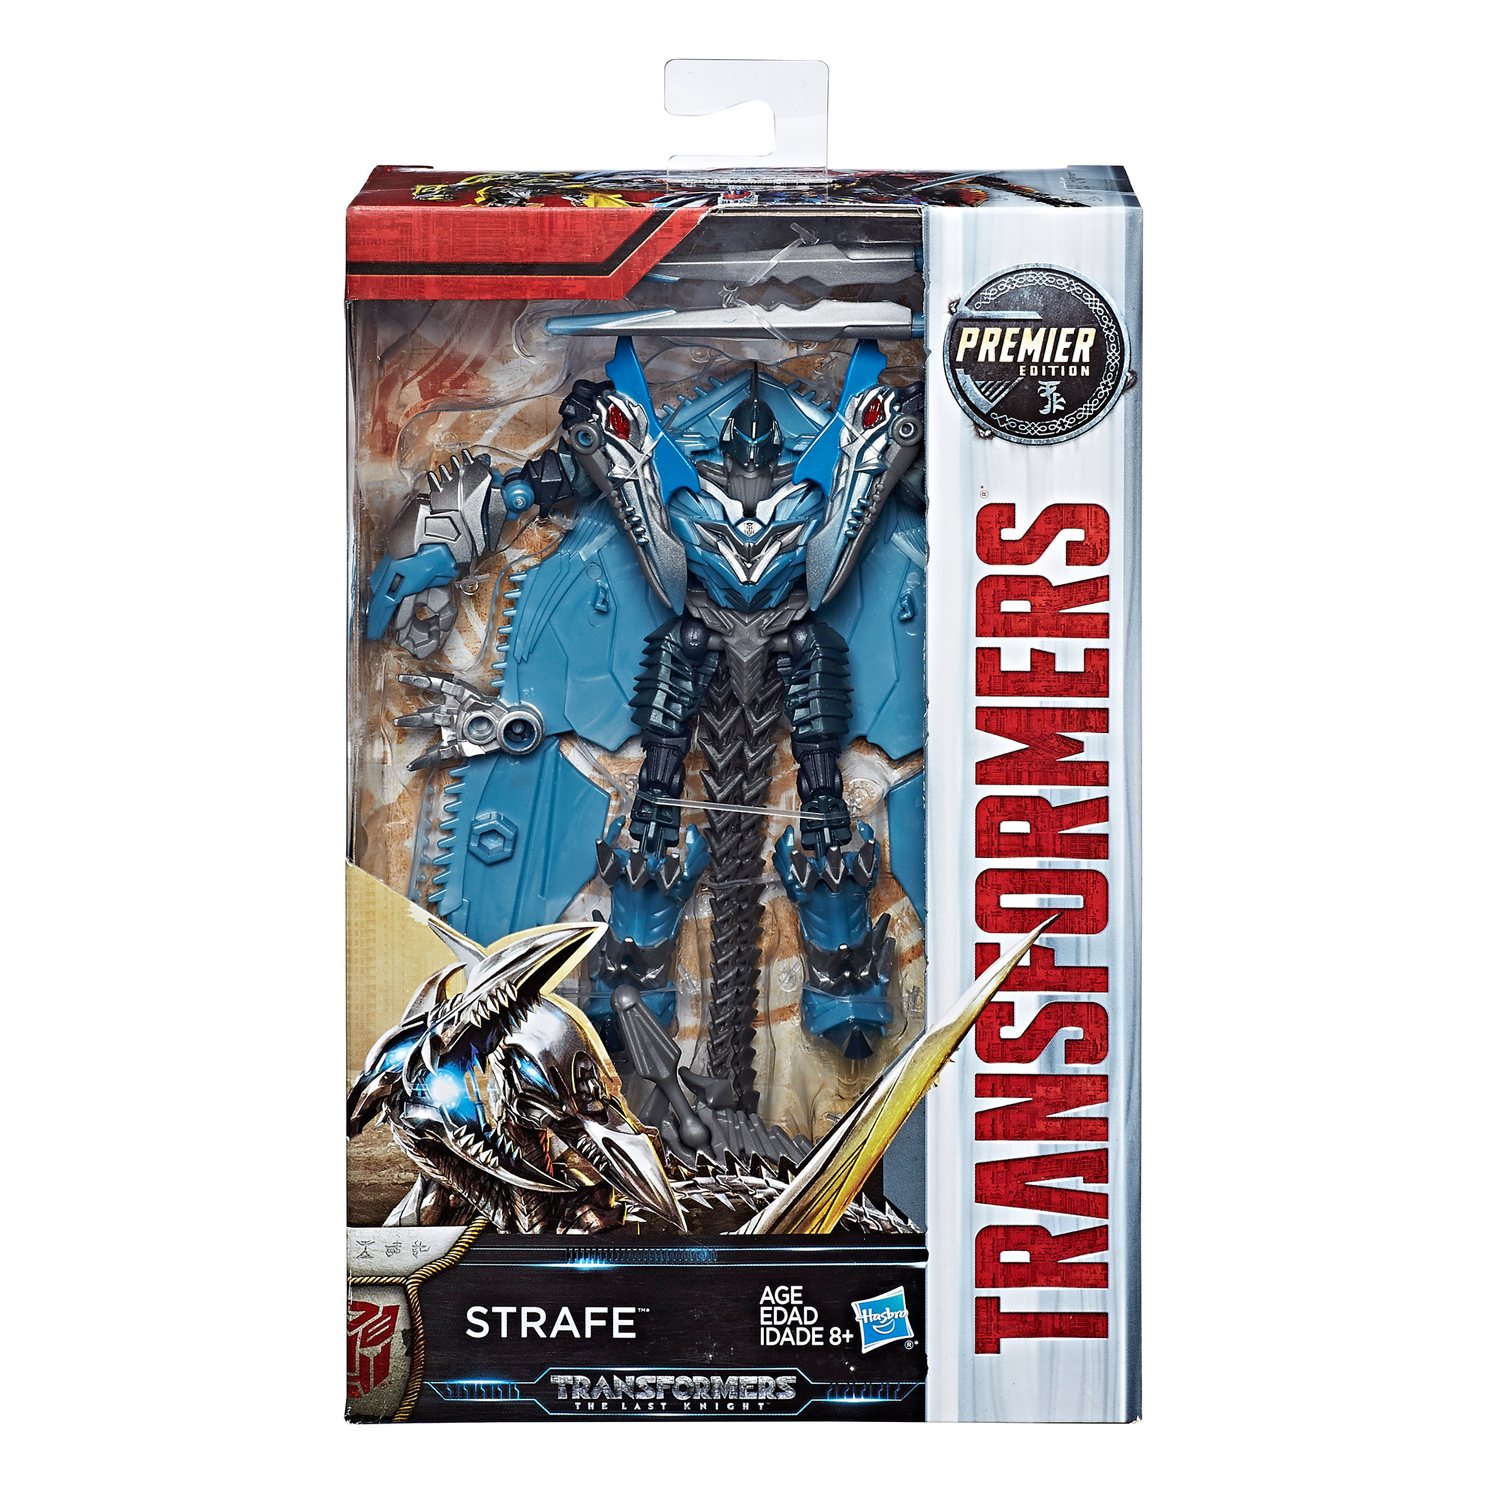 Transformers: The Last Knight Premier Edition Deluxe Strafe - image 2 of 3